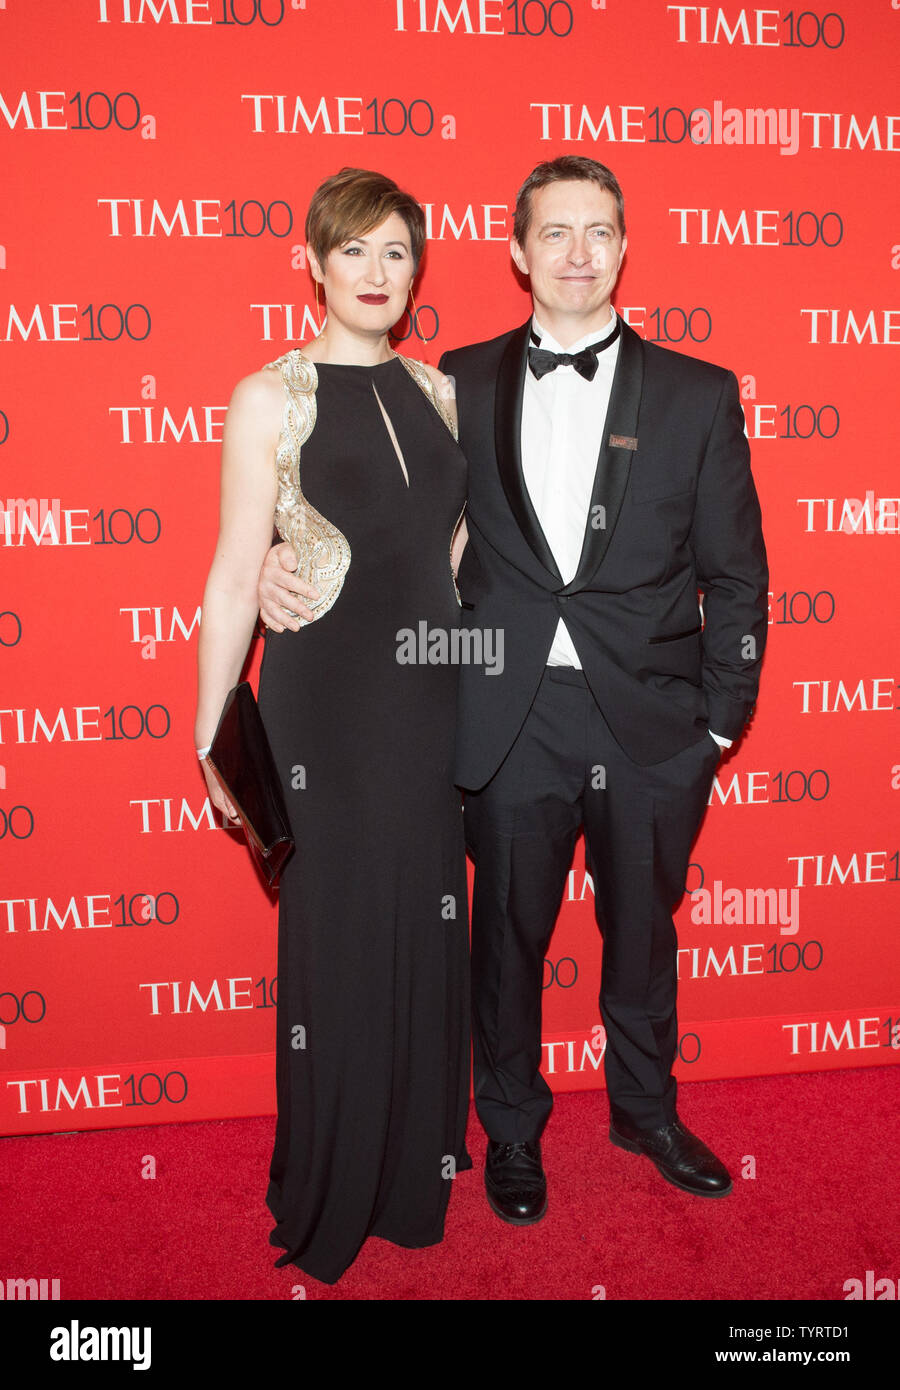 Michael Gillon, R arrives on the red carpet at the TIME 100 Gala at Frederick P. Rose Hall, Home of Jazz at Lincoln Center, in New York City on April 26, 2017. TIME 100 celebrates TIME Magazine's list of the 100 Most Influential People in the World.      Photo by Bryan R. Smith/UPI Stock Photo